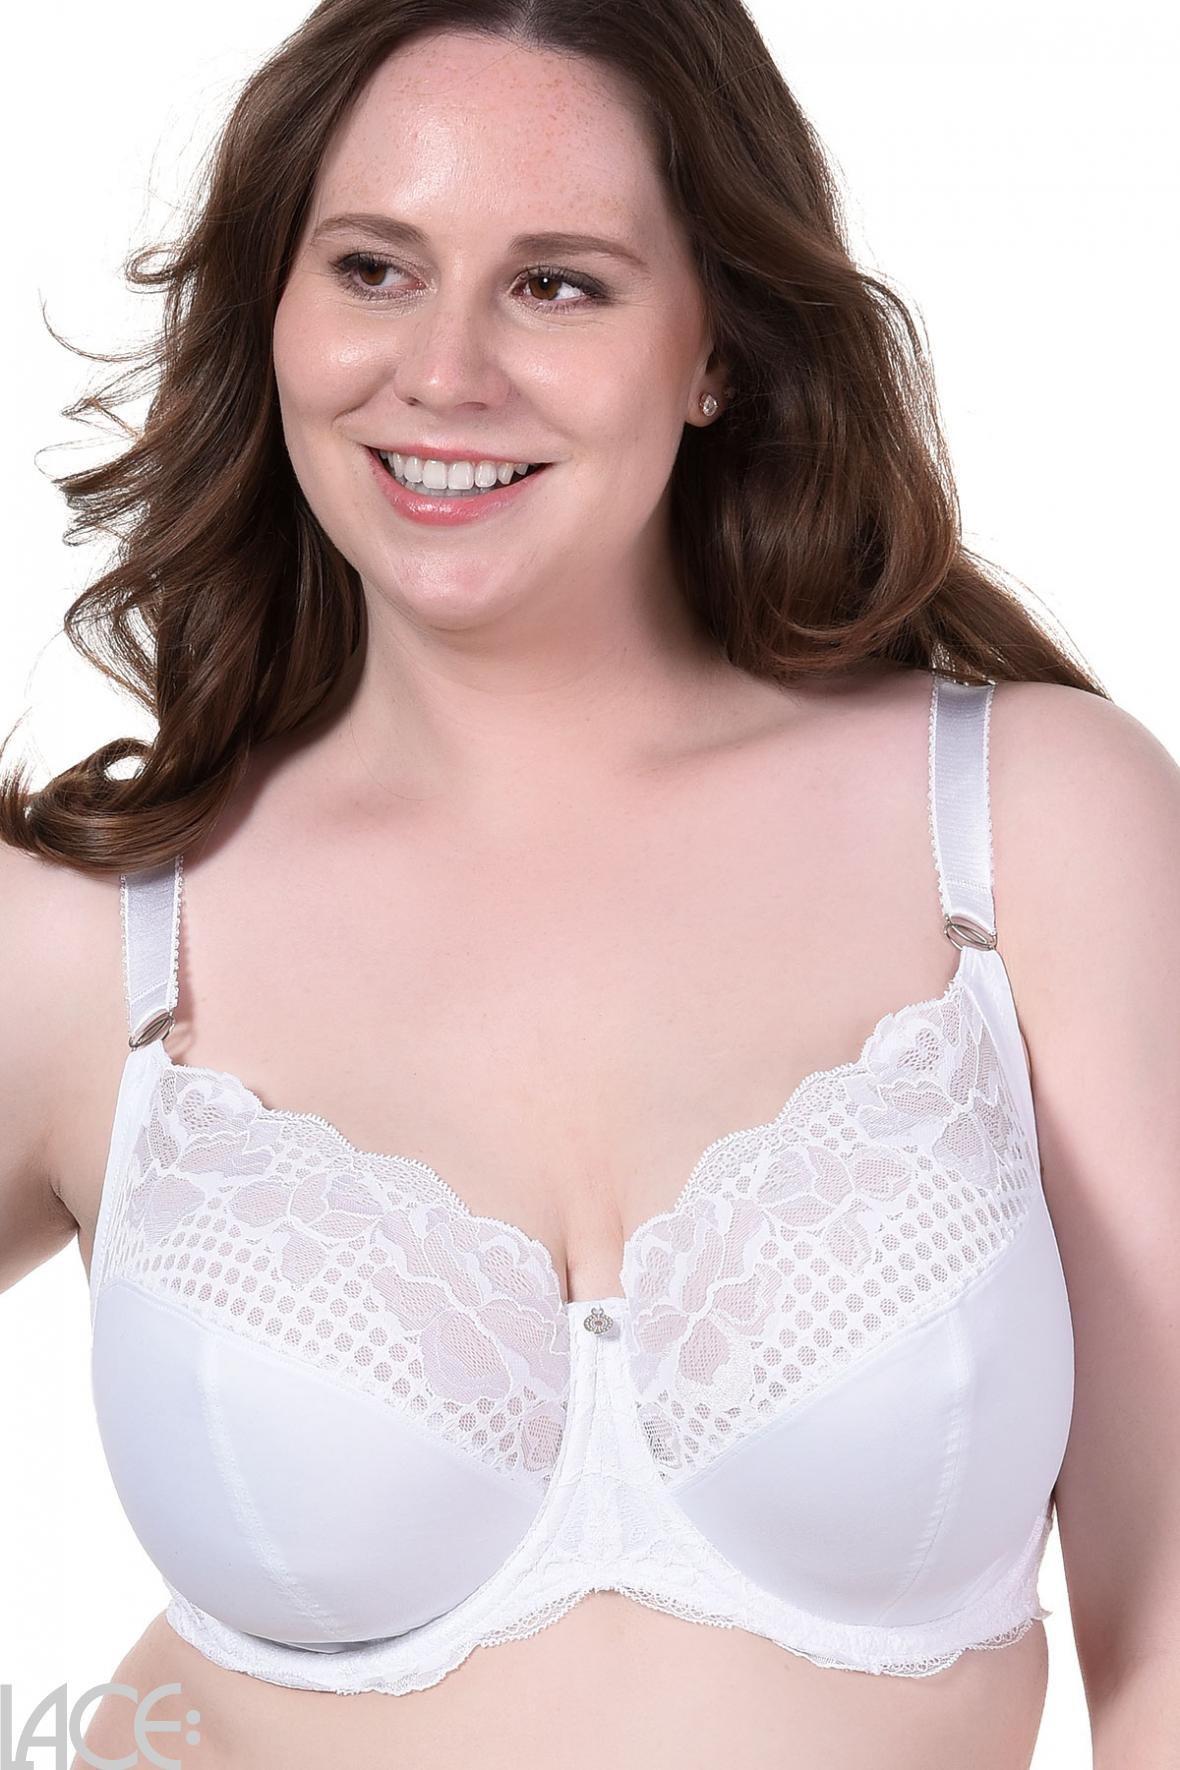 Fantasie Reflect Side Support Bra in Nude: 36E